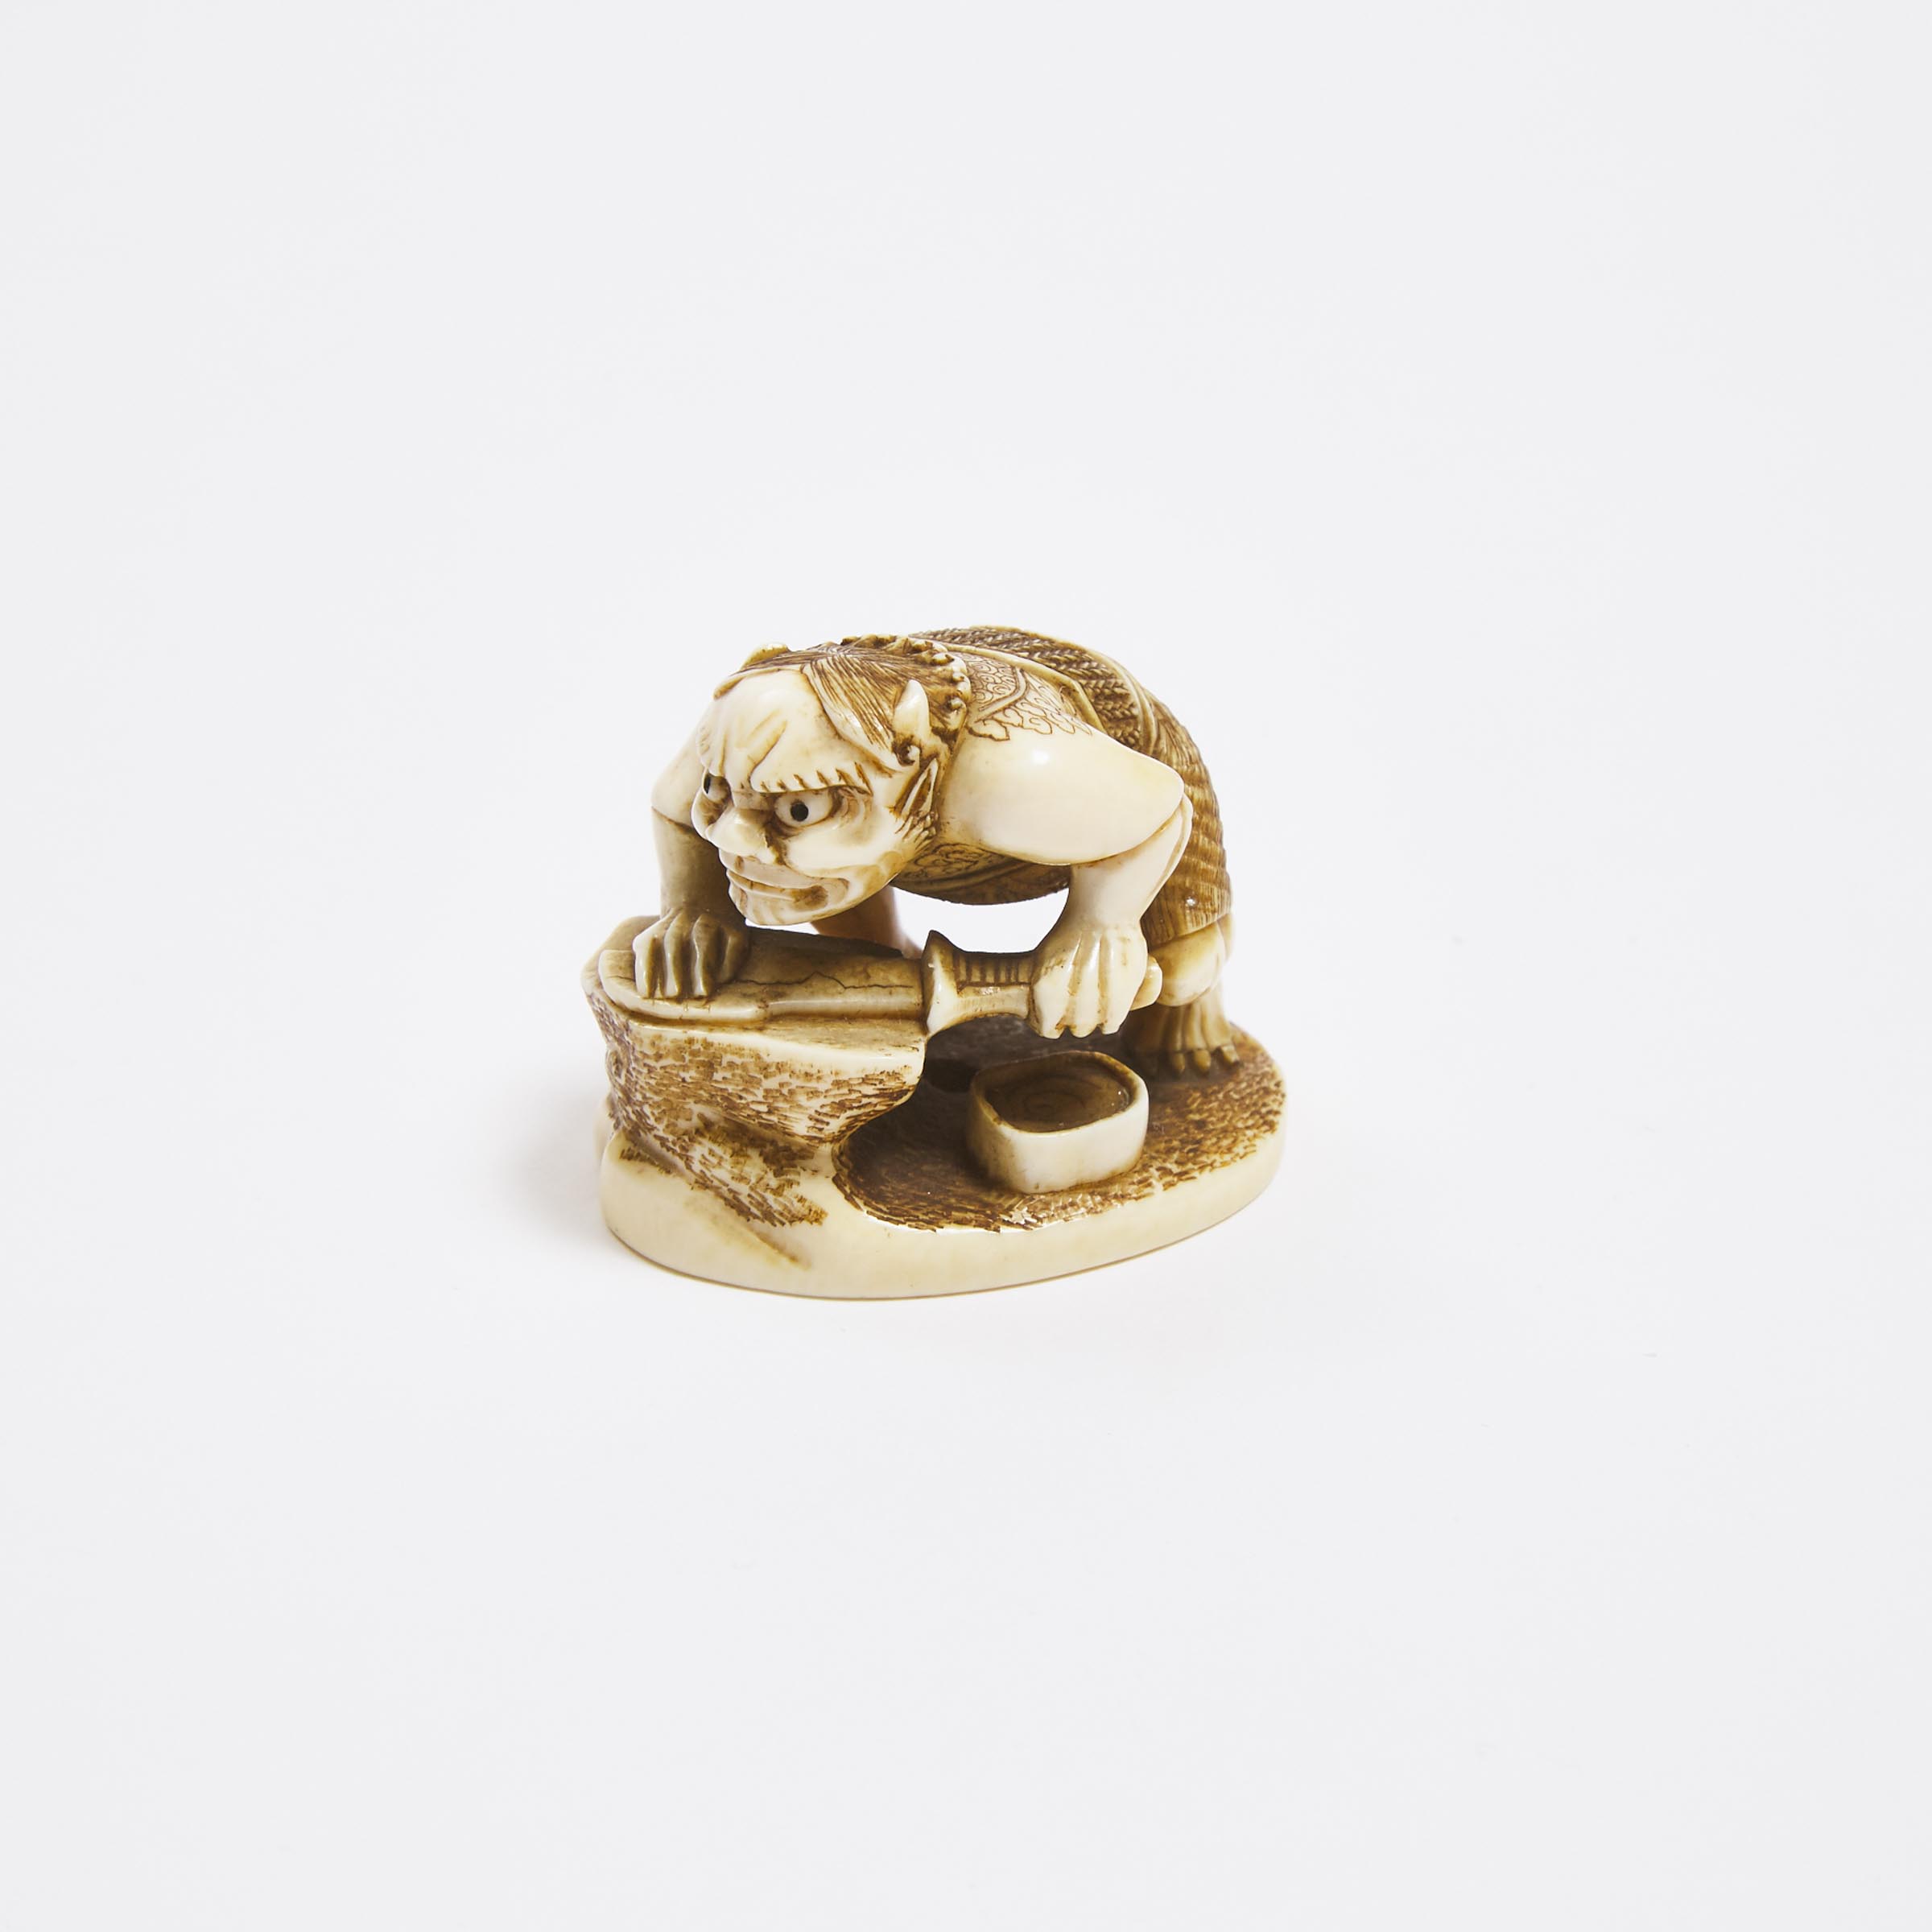 An Ivory Netsuke of an Oni Sharpening a Blade, Signed Kozan, Mid to Late 19th Century